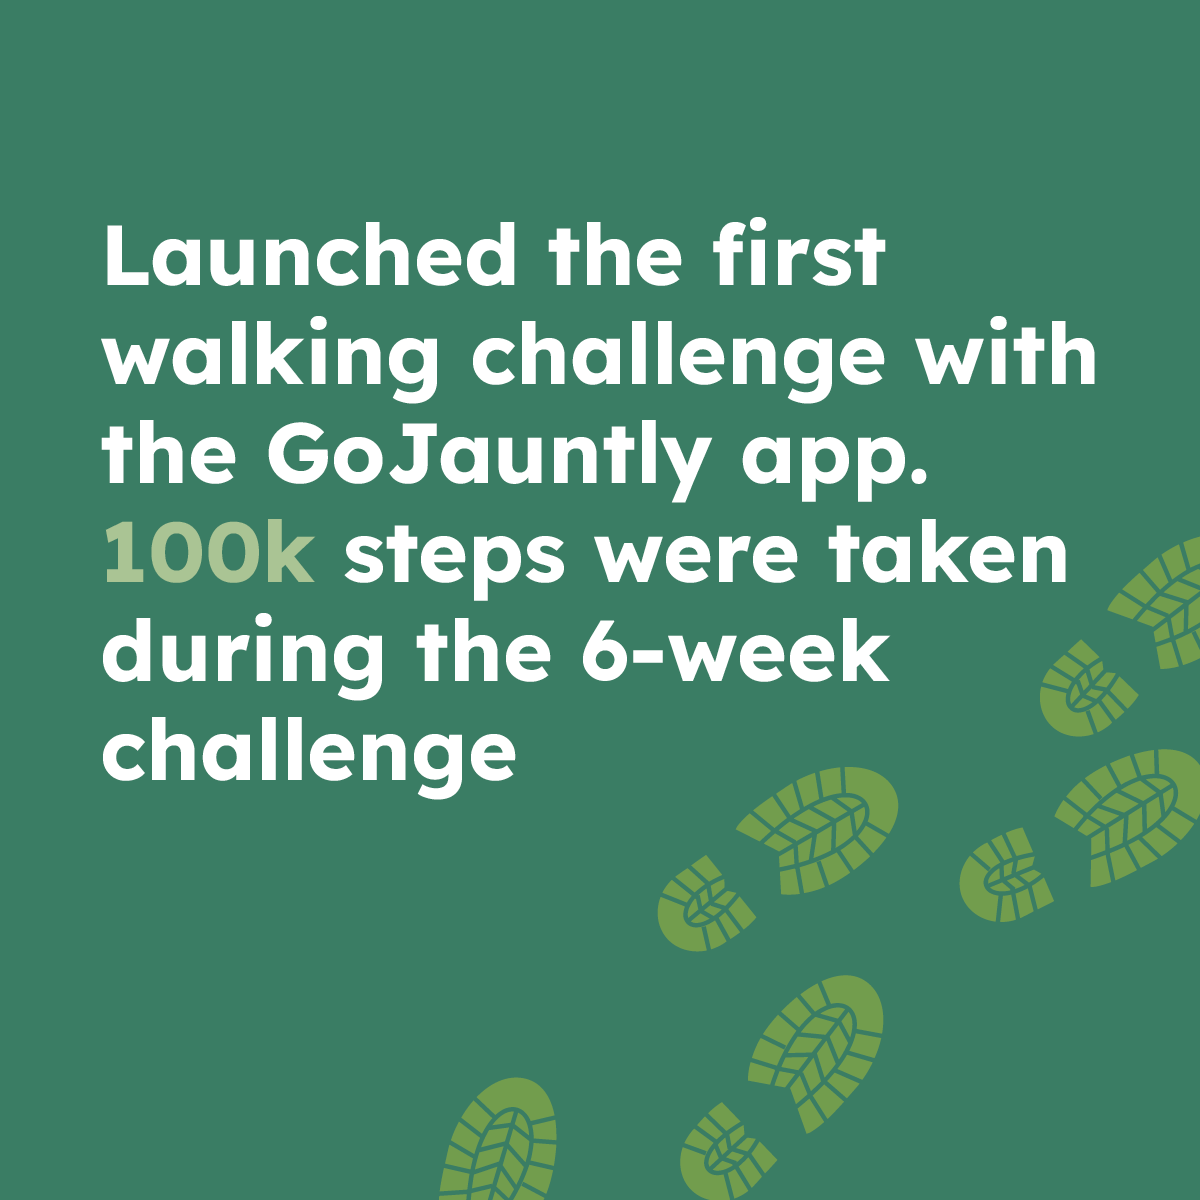 Launched the first walking challenge with the GoJaunty app. 100k steps were taken during the 6-week challenge.